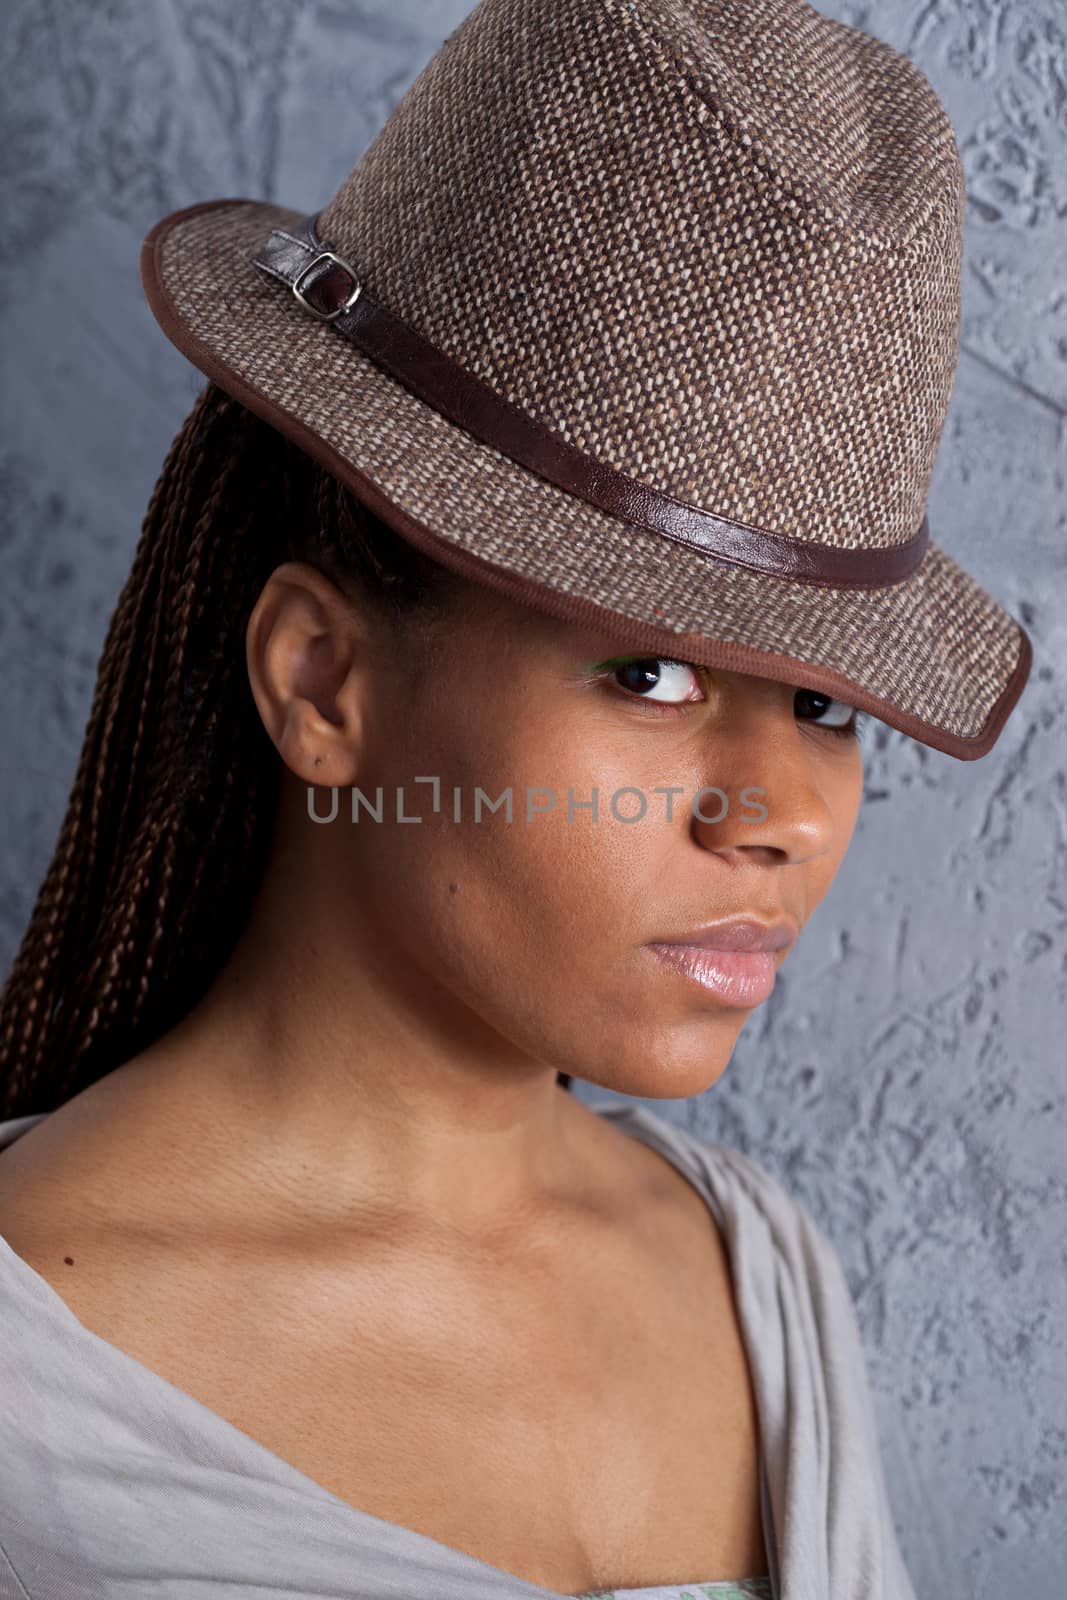 portrait of a young woman in hat